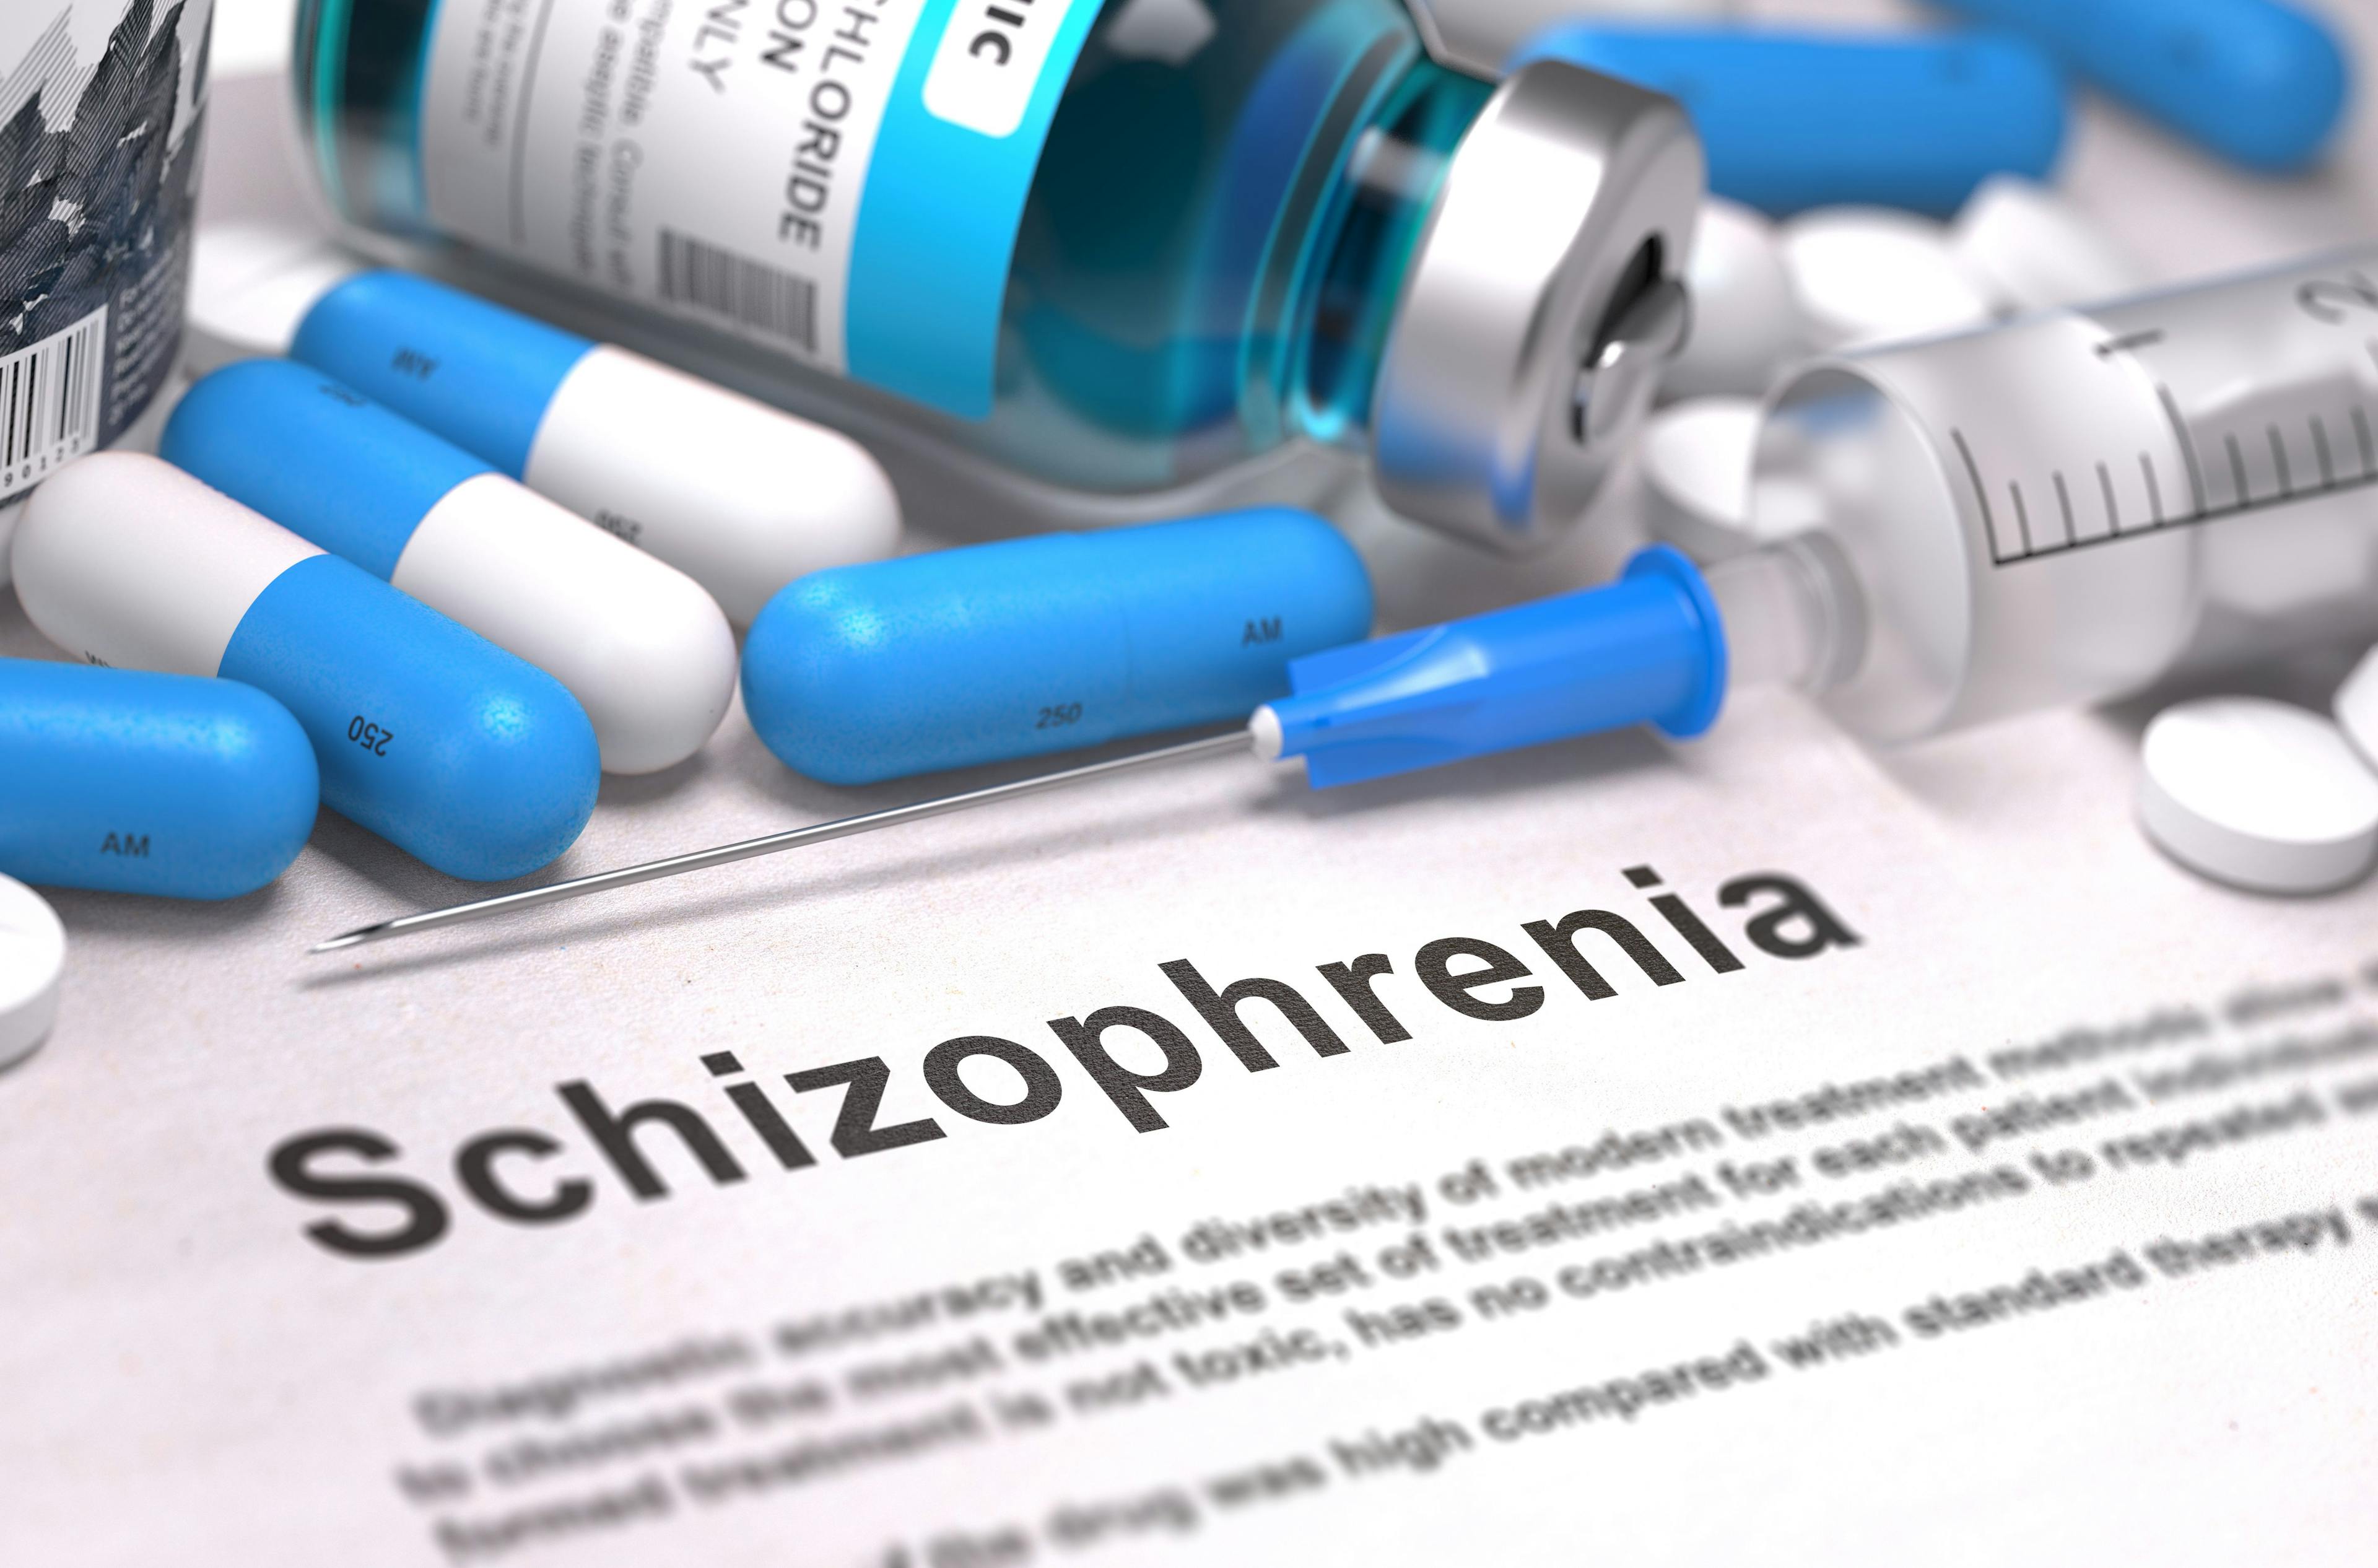 Positive Results Announced From Phase 3 Trial of Oral Weekly Risperidone for Schizophrenia 